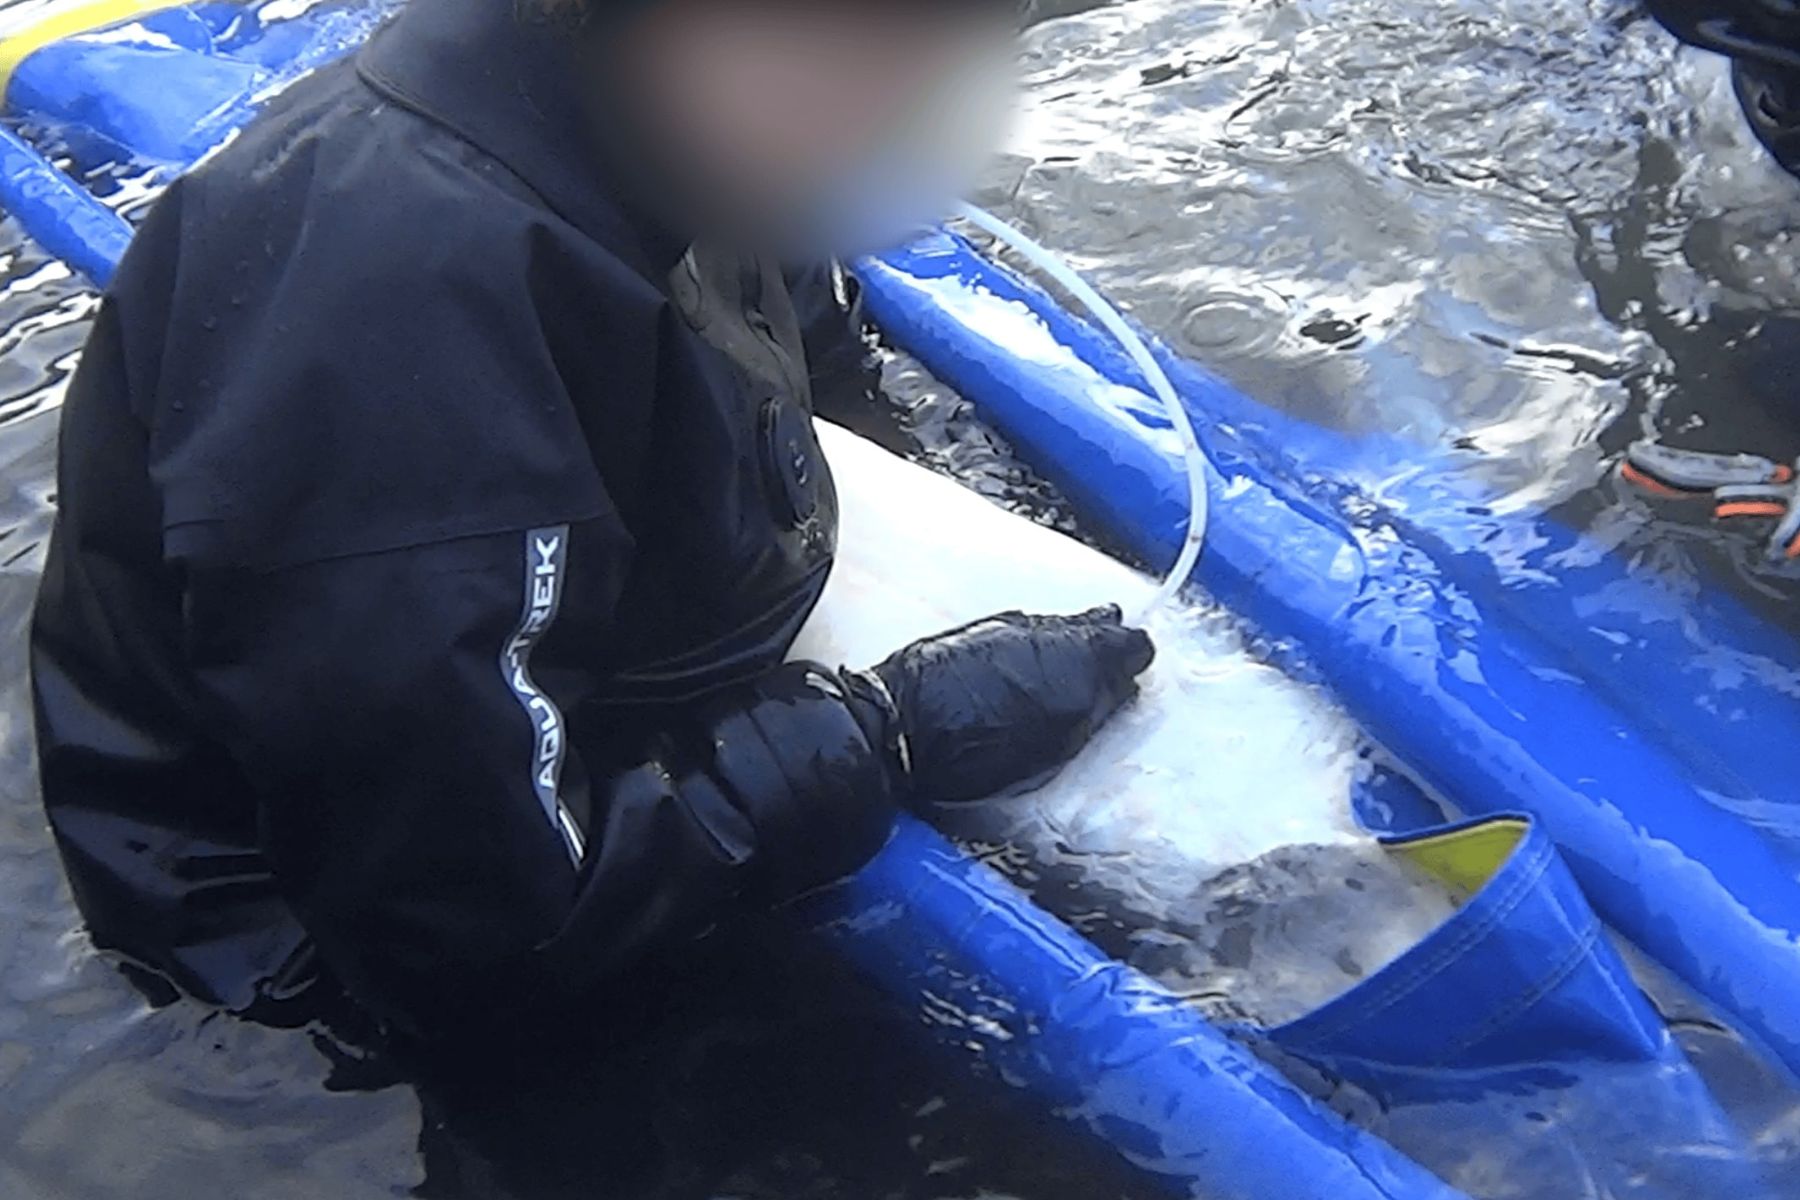 Northern Divine Aquafarms worker uses mouth to suck eggs out of sturgeon with tube